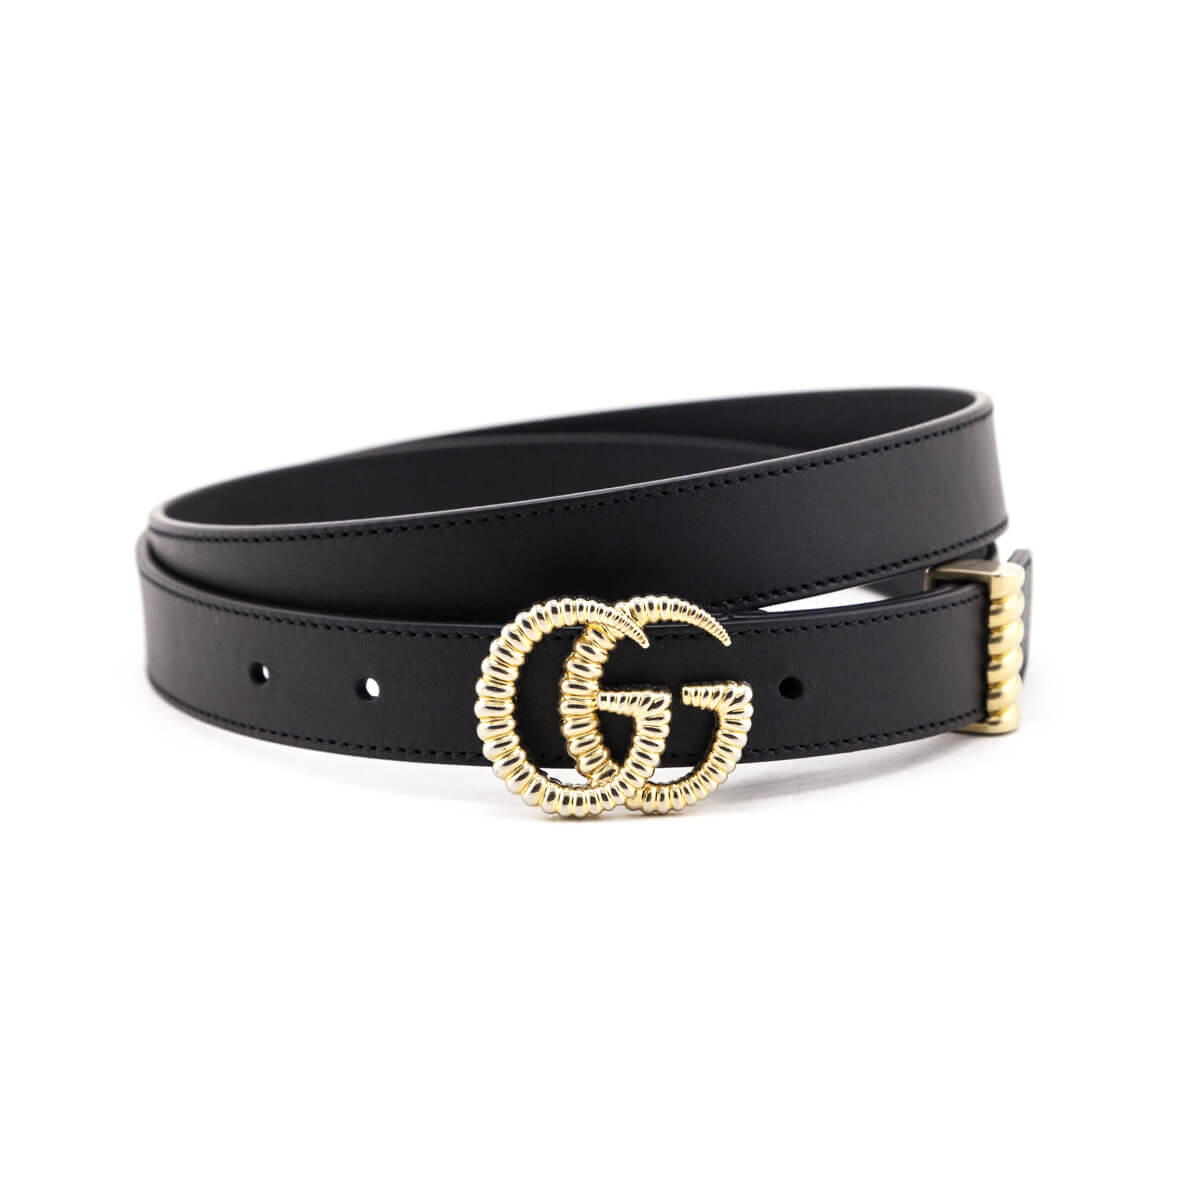 Gucci Black Leather Torchon GG Belt Size XL - Love that Bag etc - Preowned Authentic Designer Handbags & Preloved Fashions